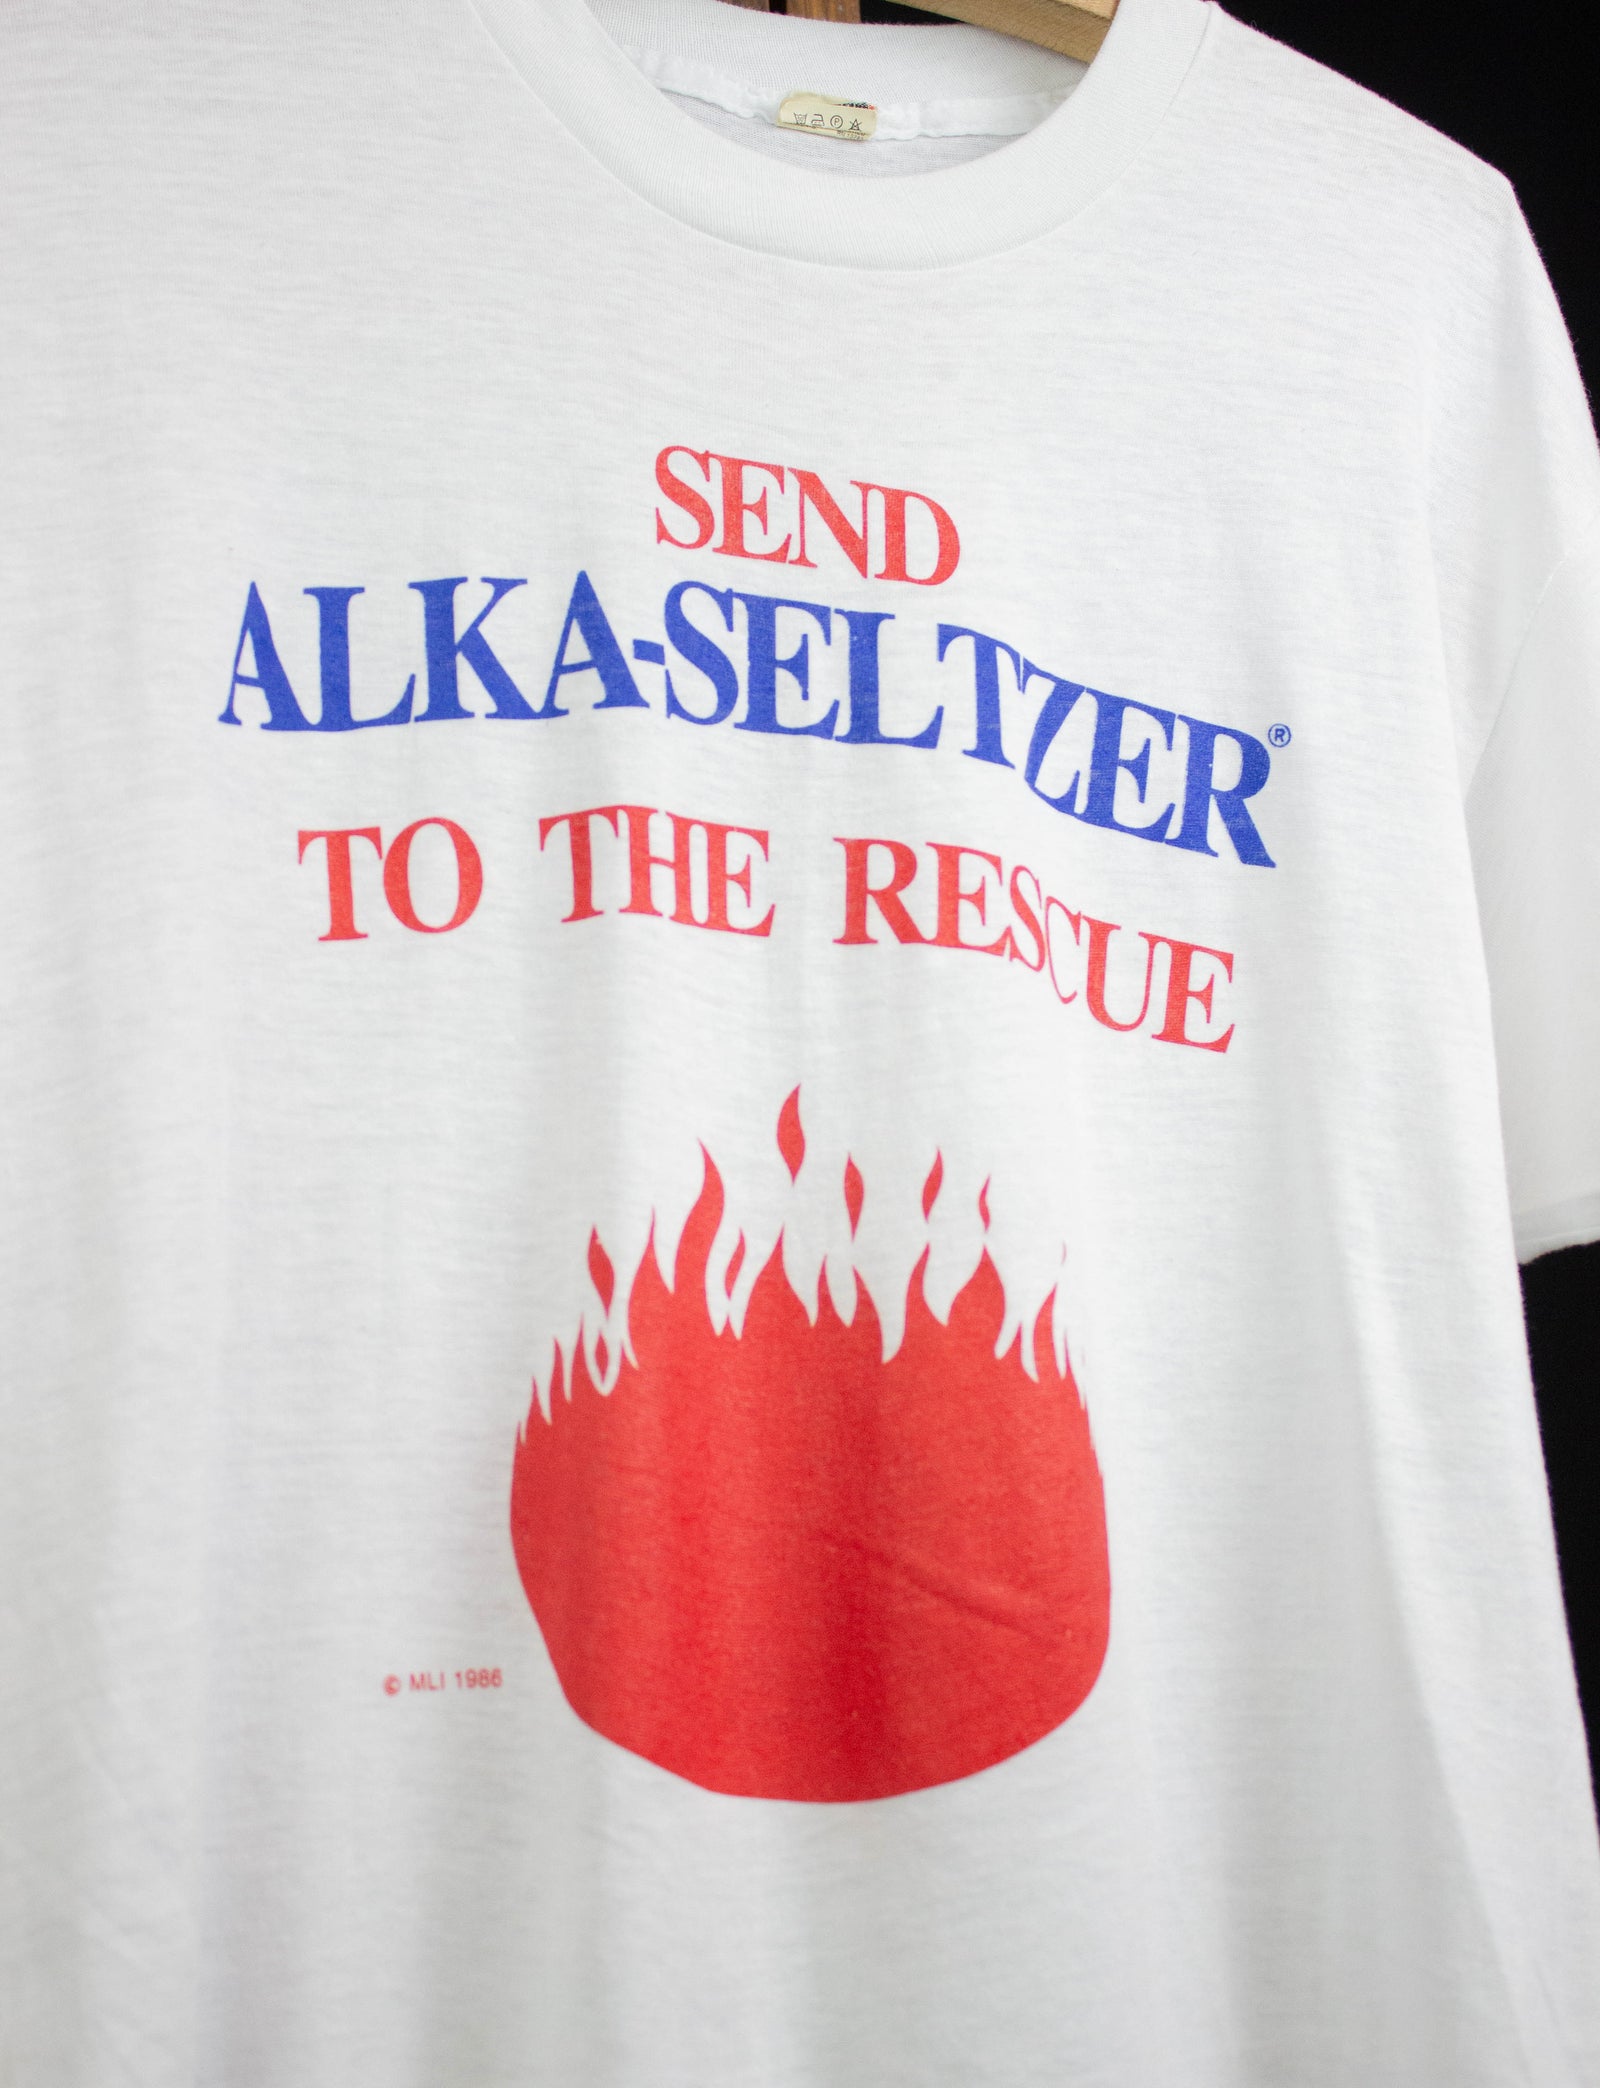 Vintage 1986 "Send Alka-Seltzer To The Rescue" Graphic T Shirt White Large